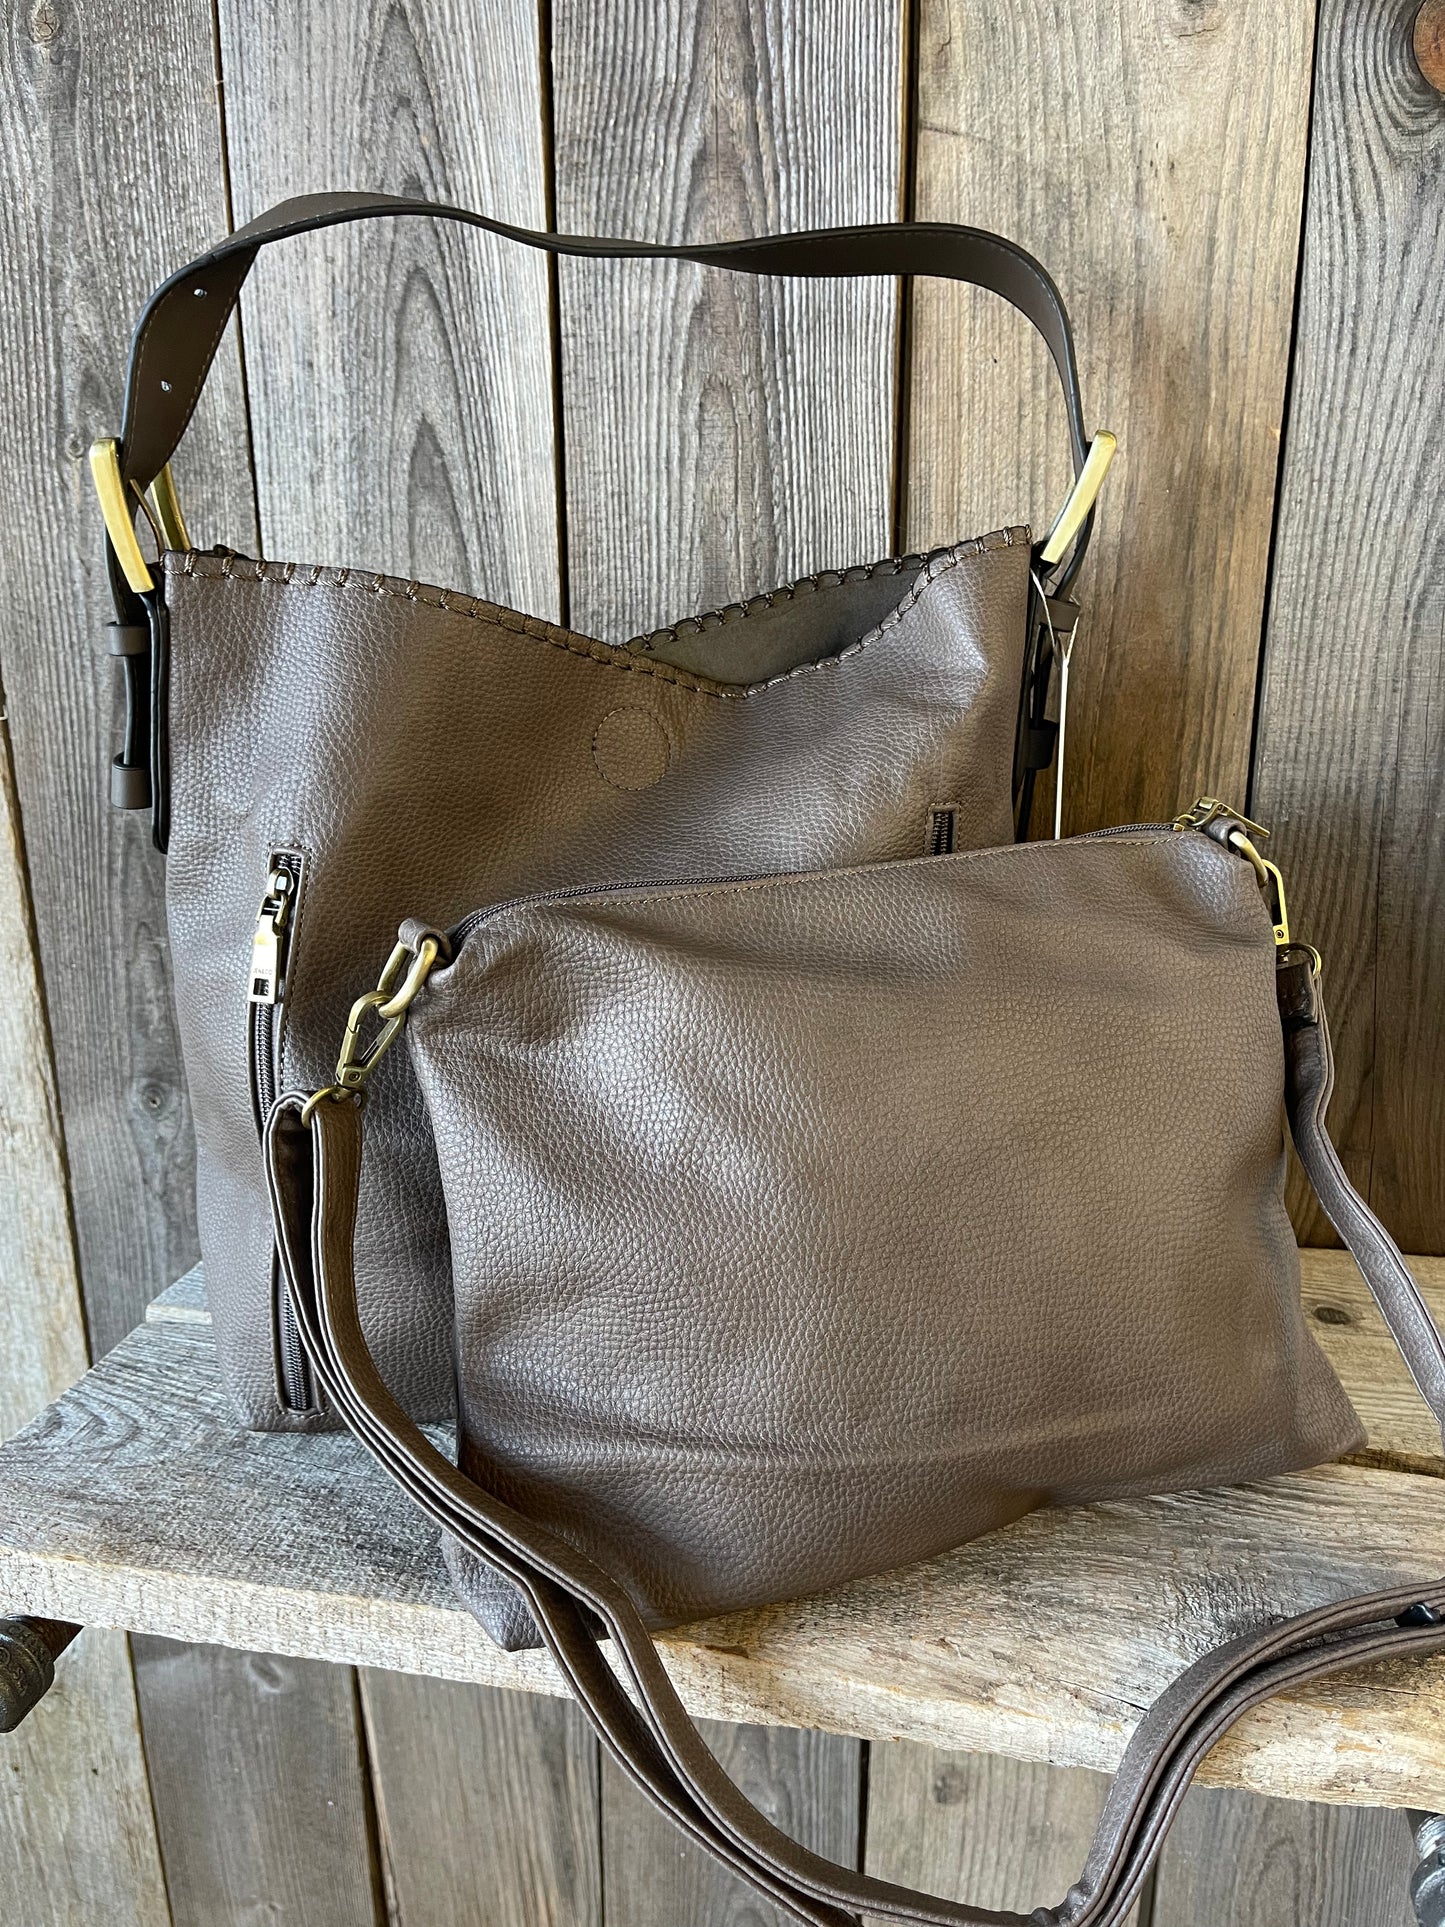 Alexia 2 in 1 Conceal Carry Hobo Bag - Chocolate